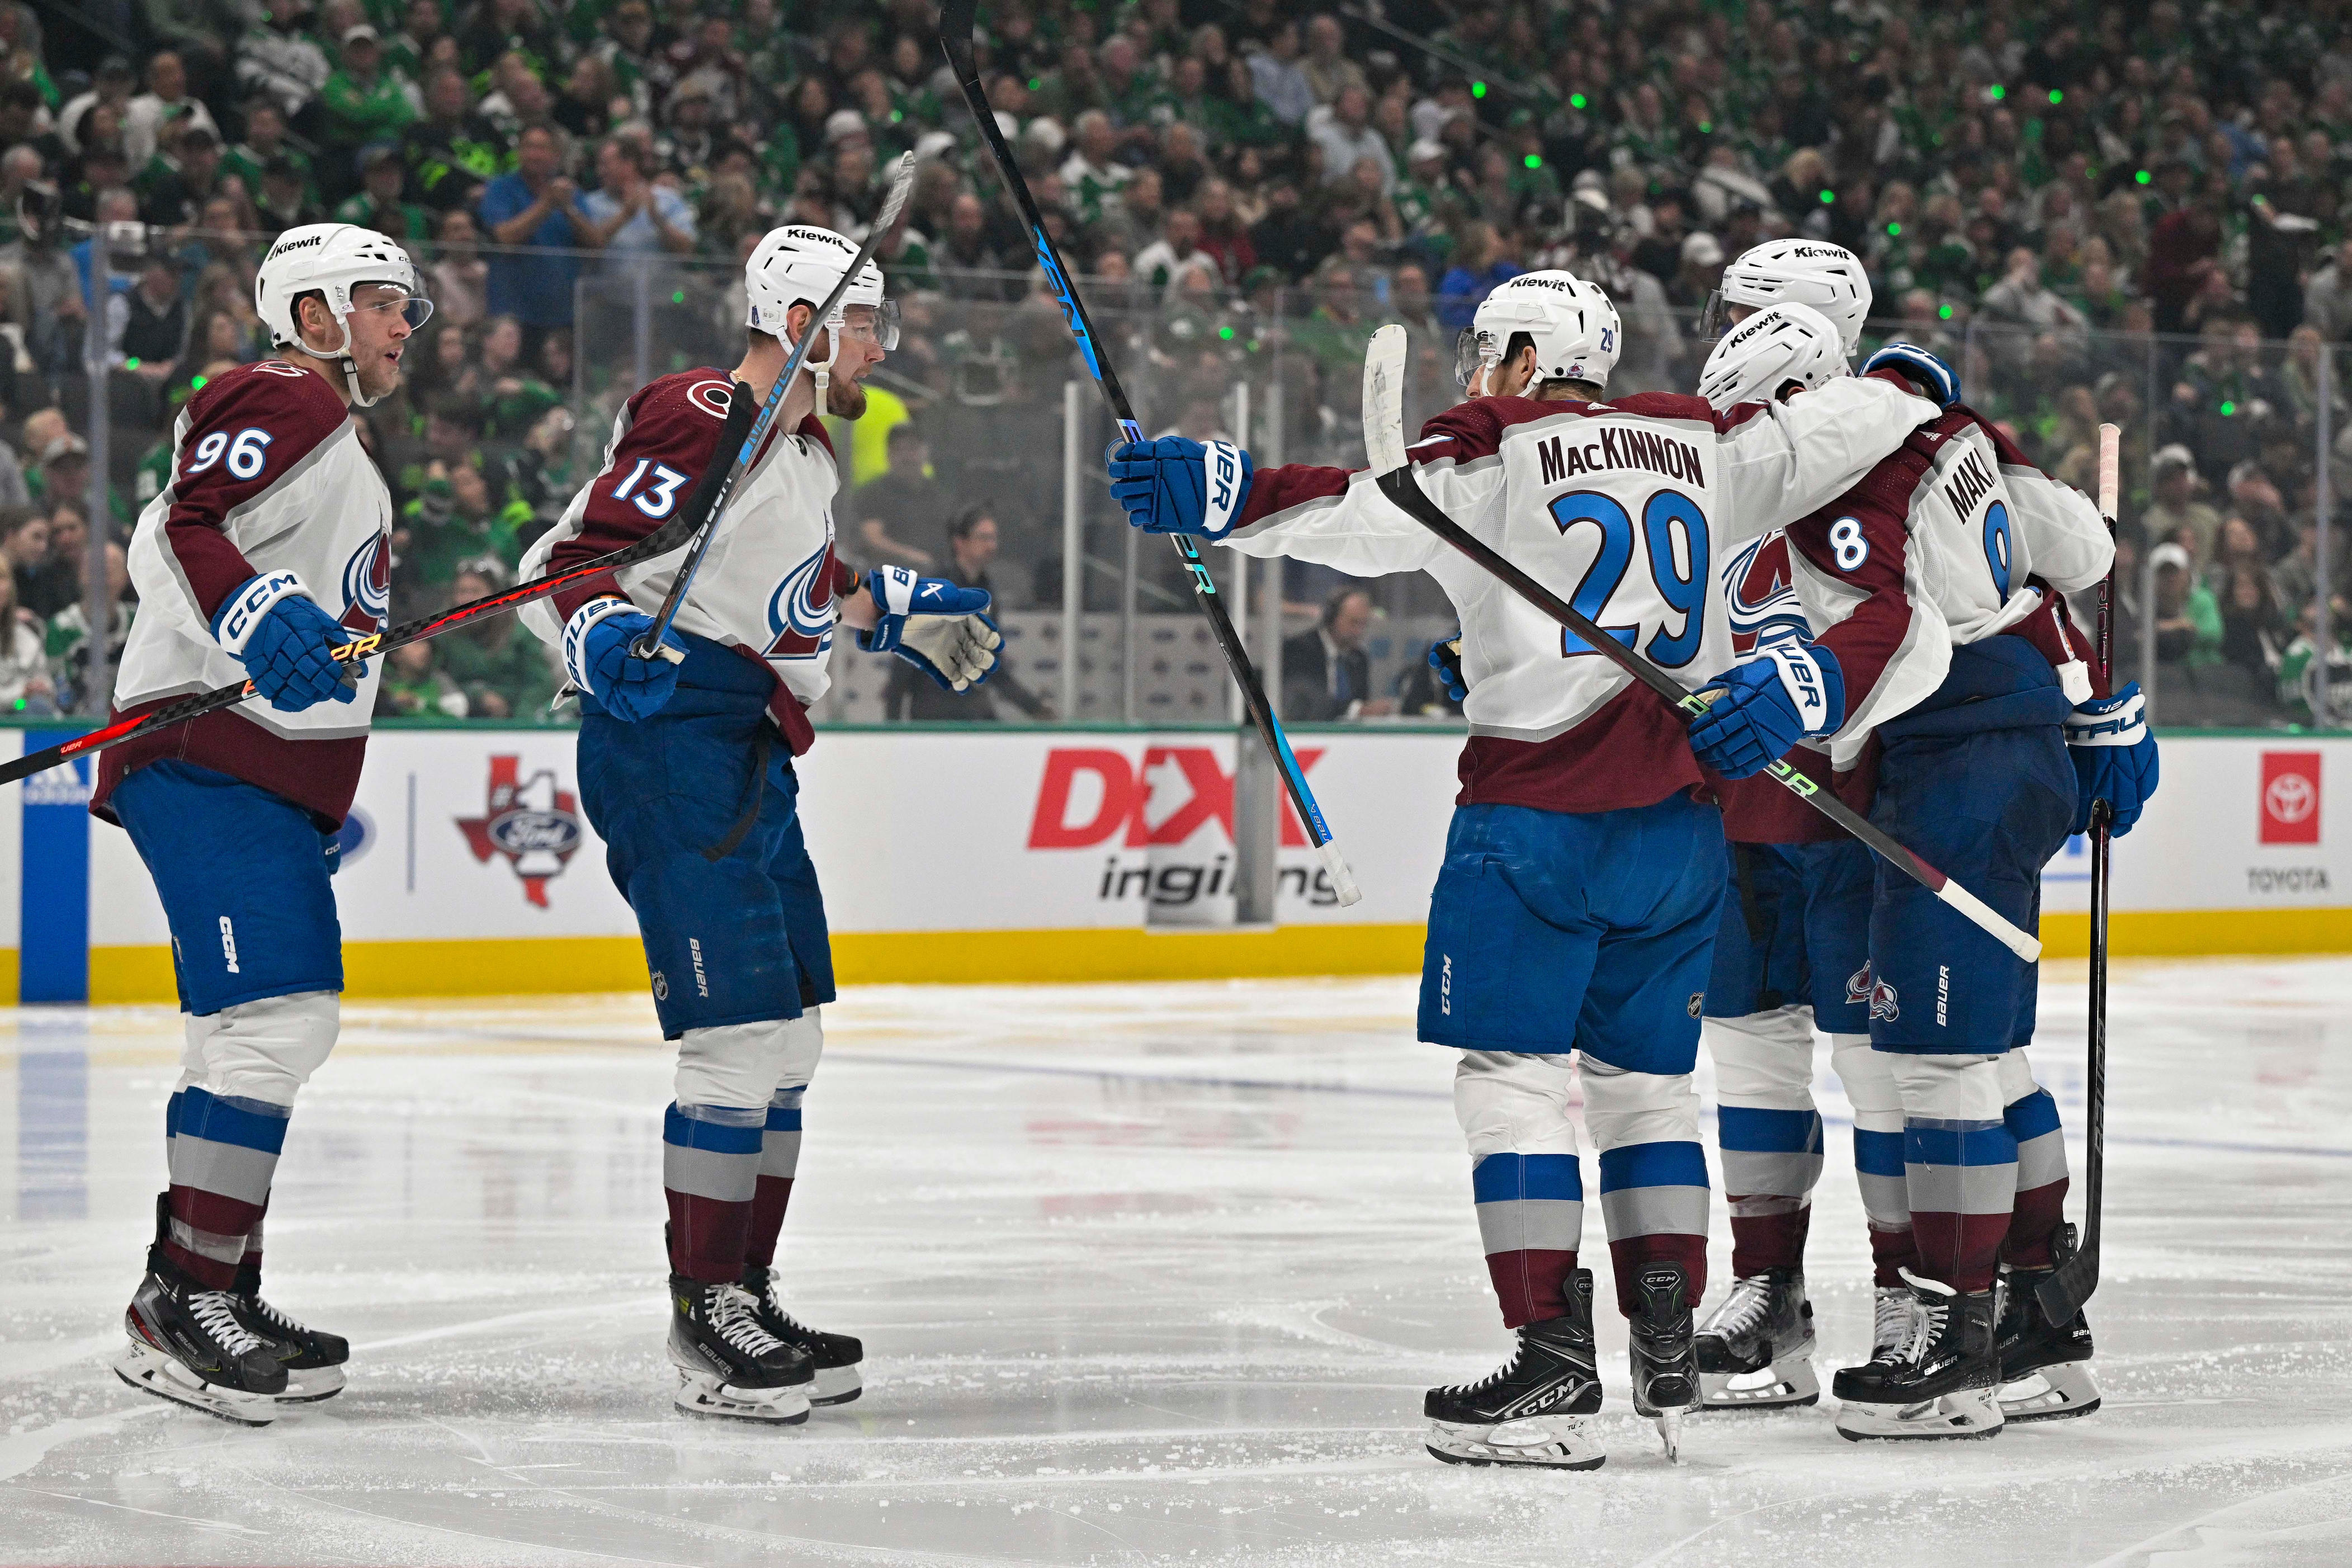 colorado avalanche rally for overtime win over dallas stars in nhl playoff game 1